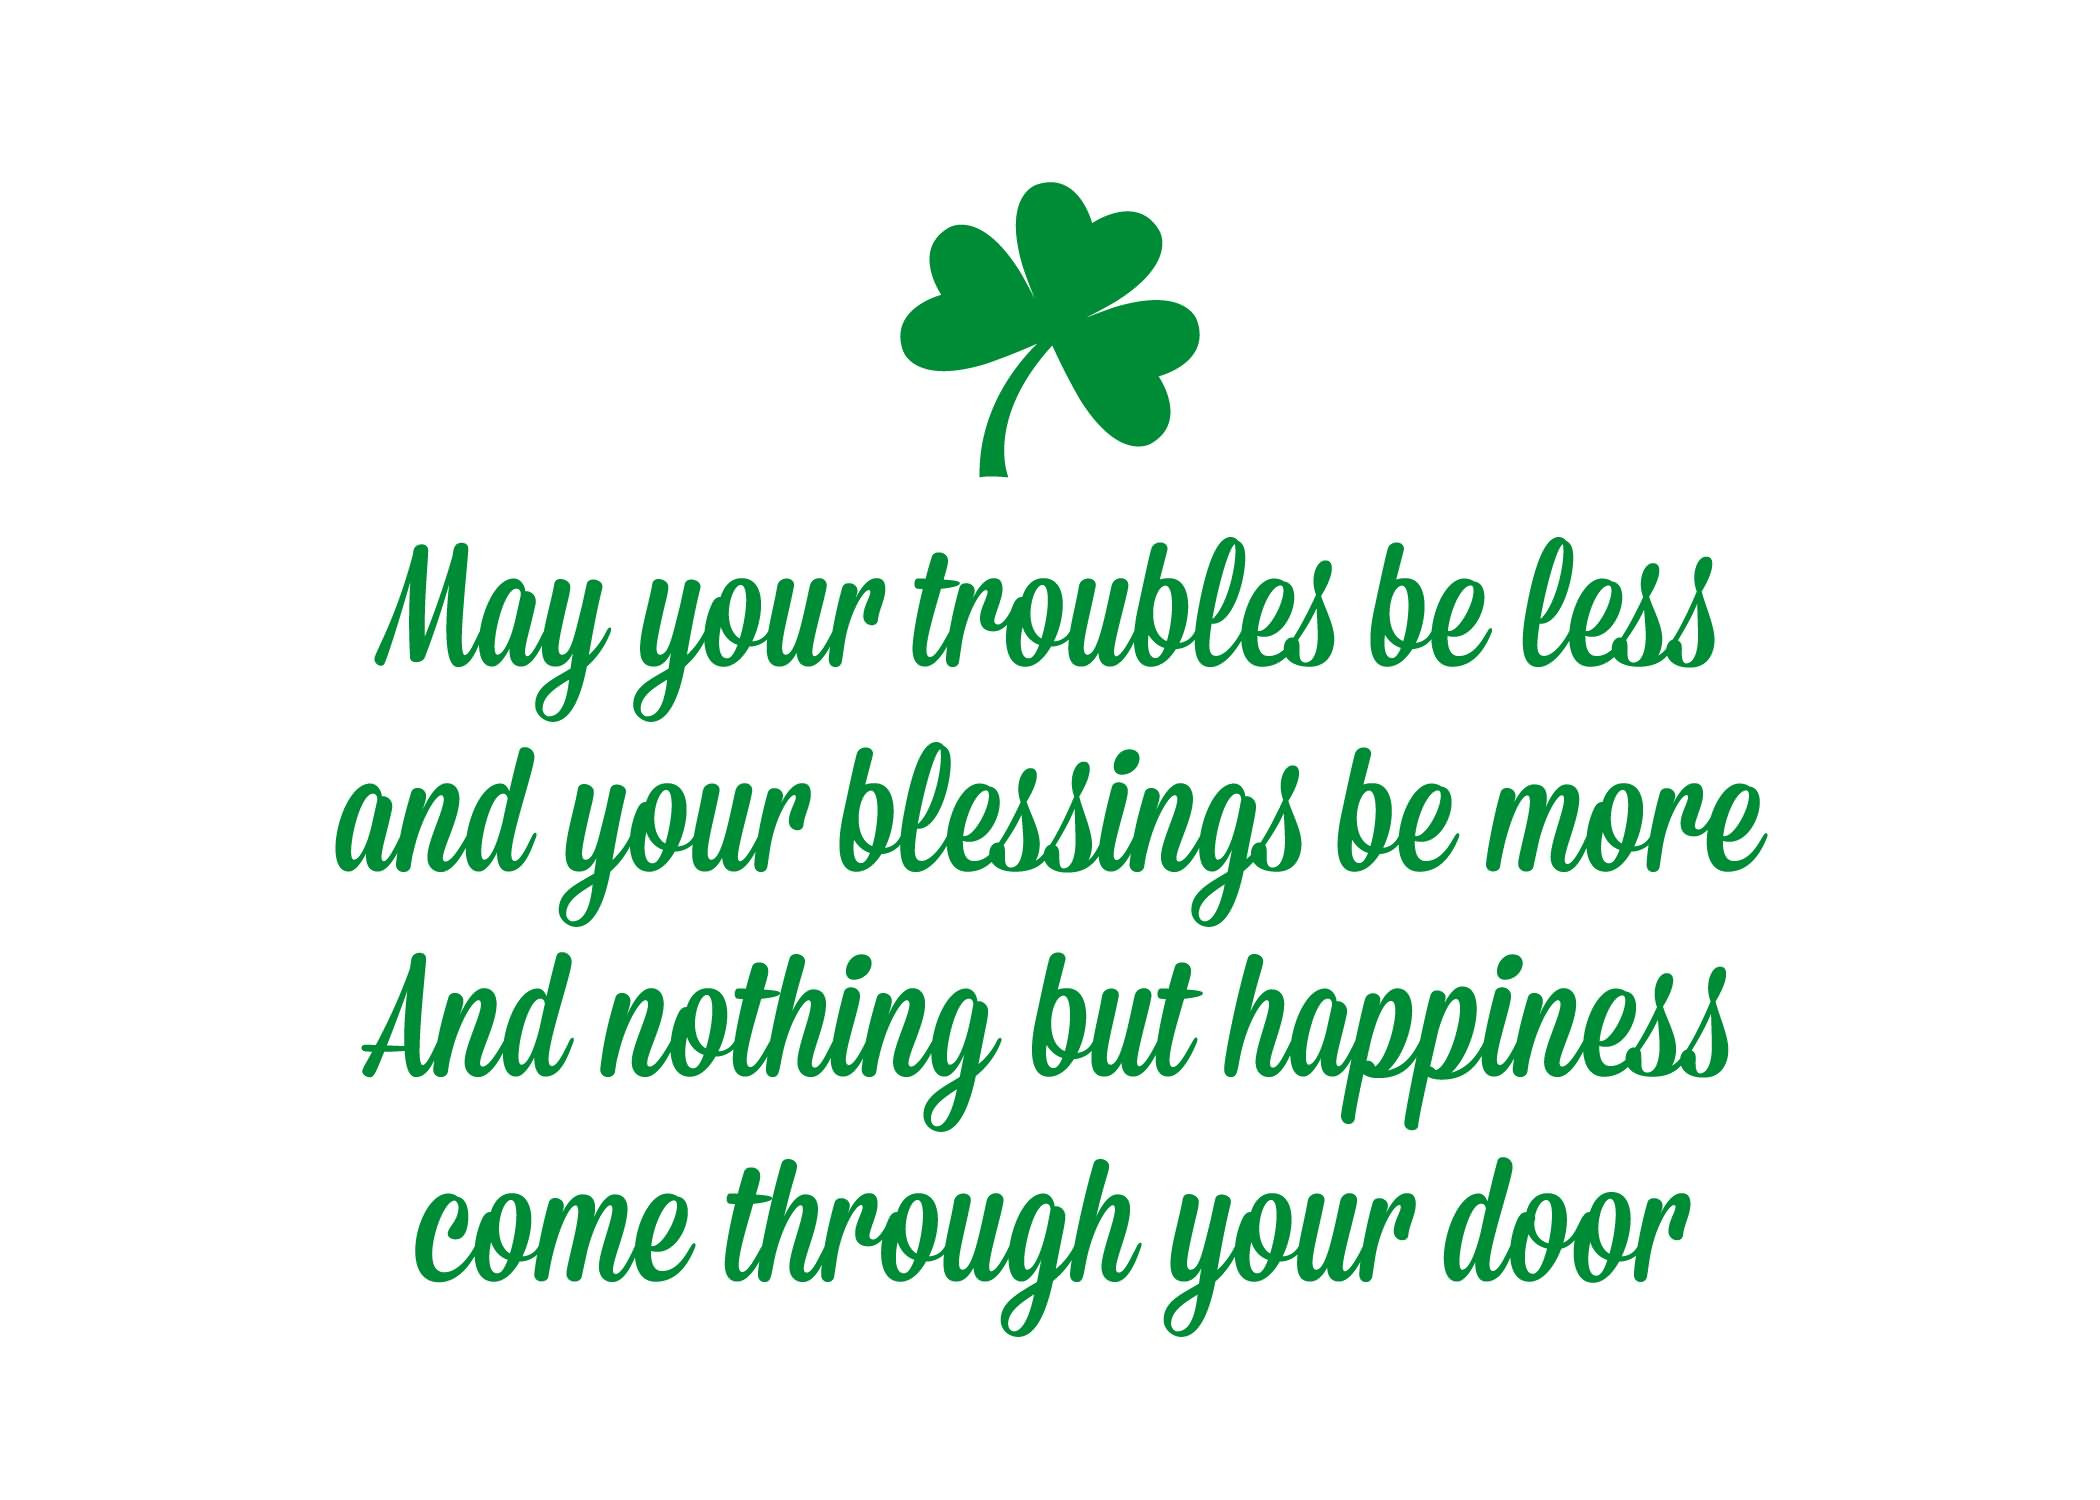 St Patrick's Day Wishes Quotes
 30 Best Saint Patrick’s Day 2018 Wishes Greetings & Messages